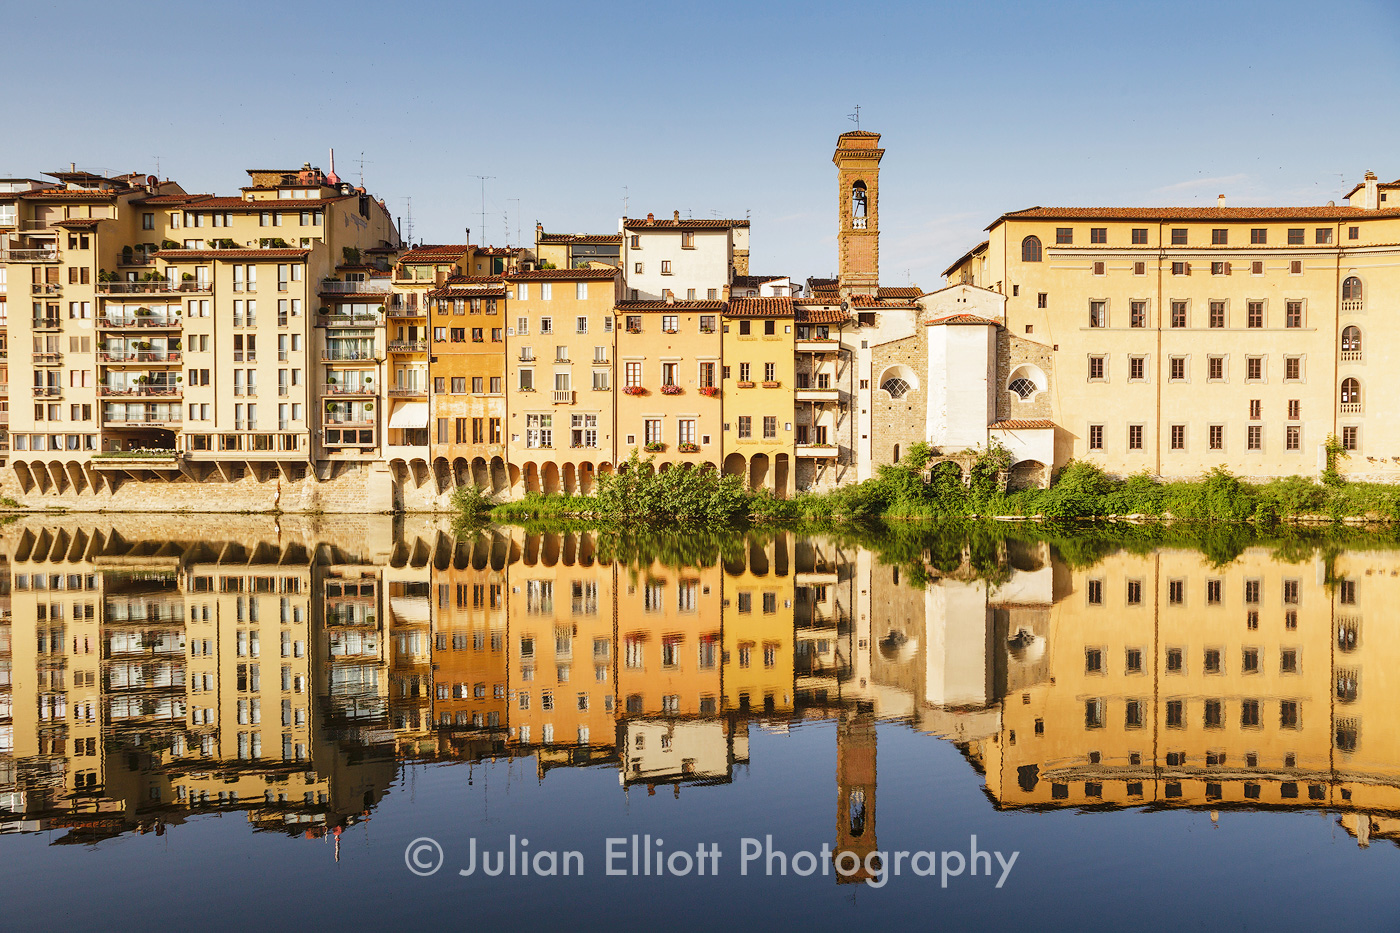 Houses by the River Arno in Florence, Italy.